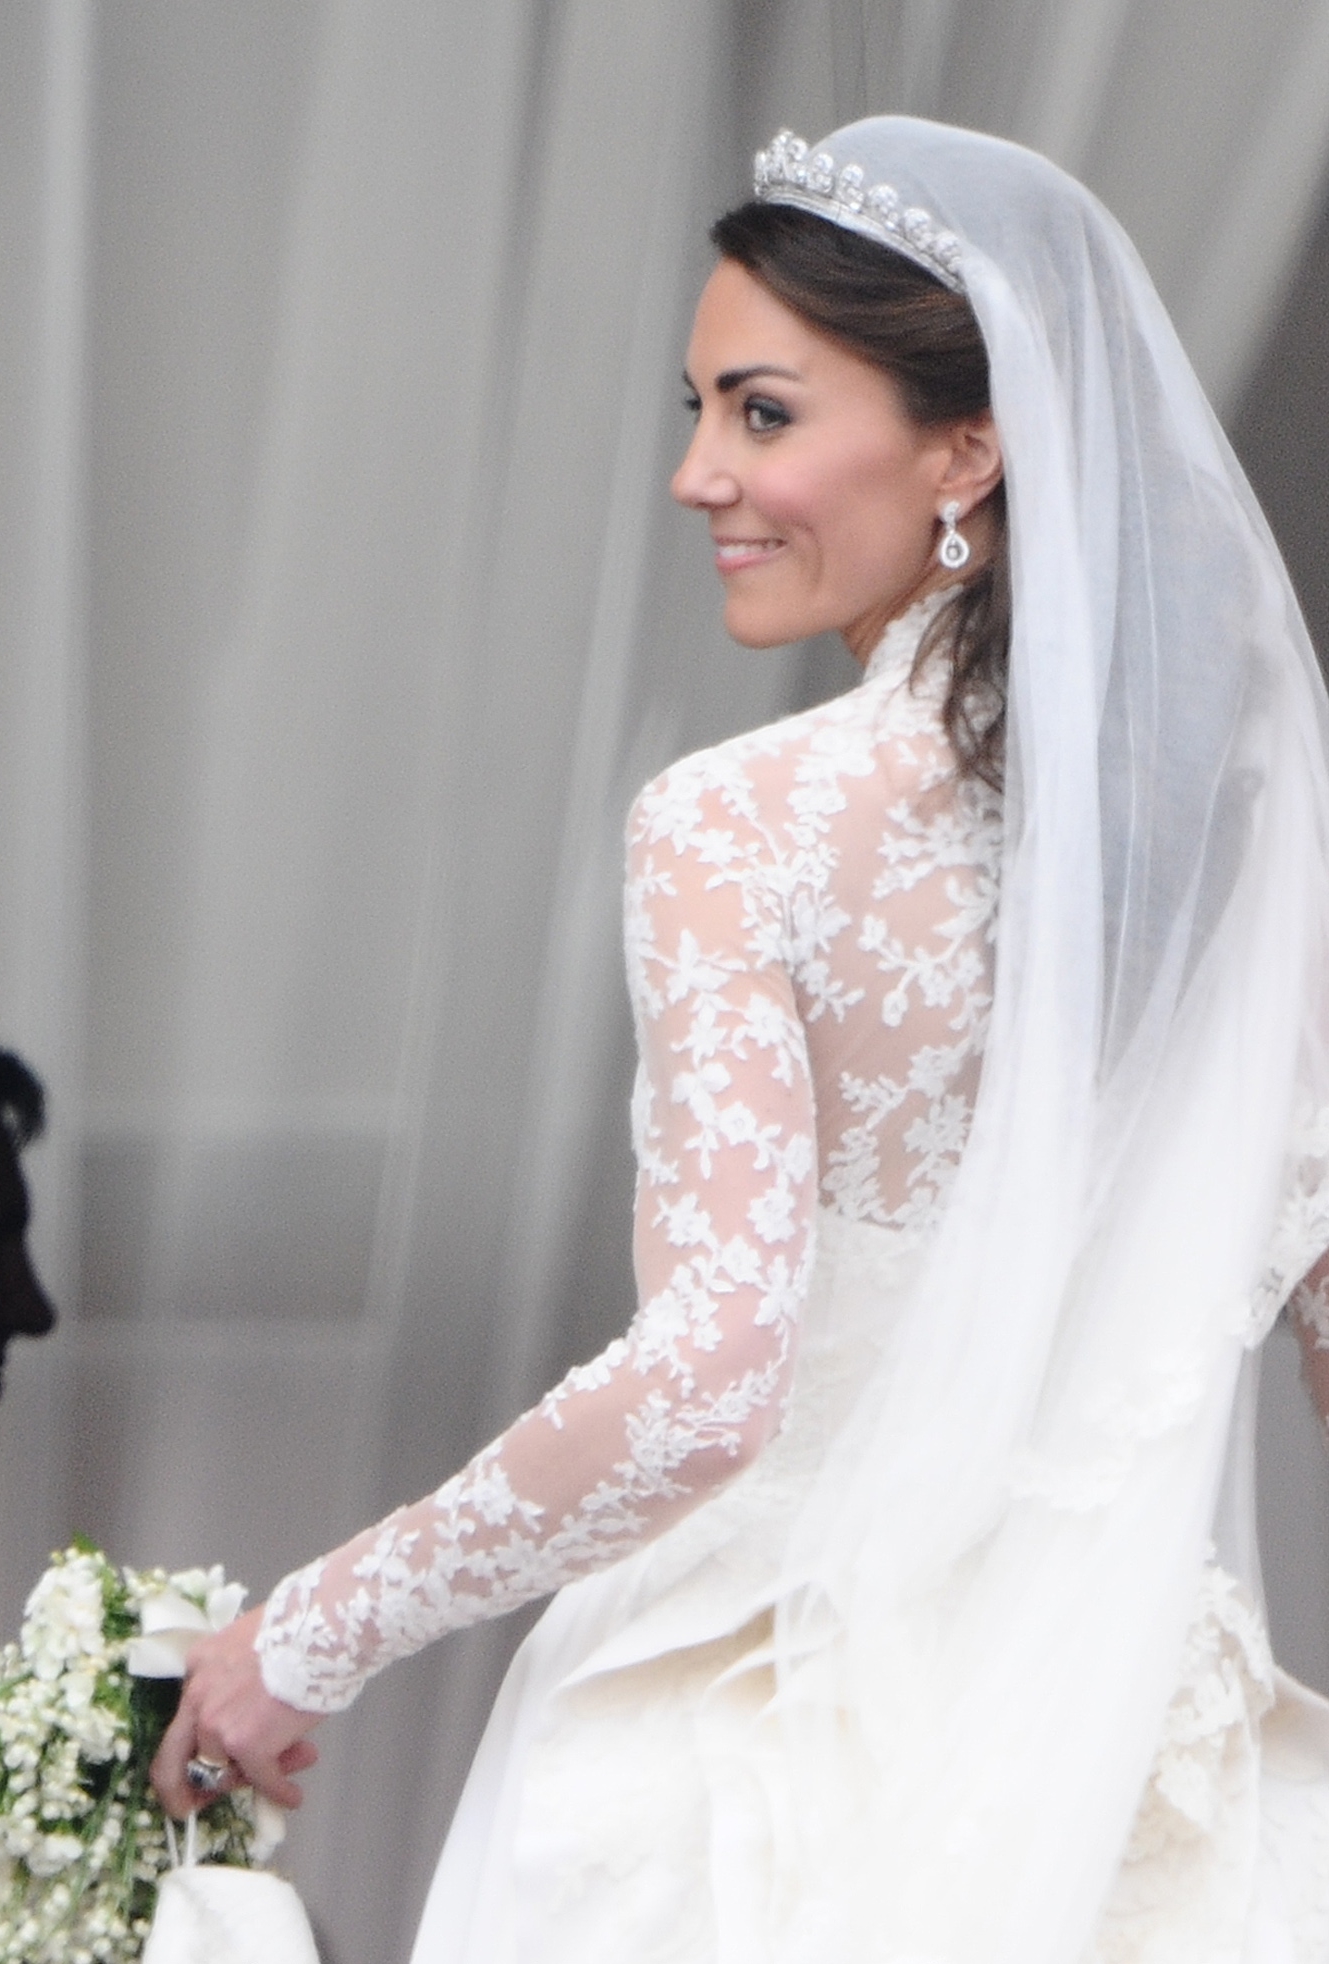 Kate Middleton turns and smiles as she leaves the balcony on her wedding day